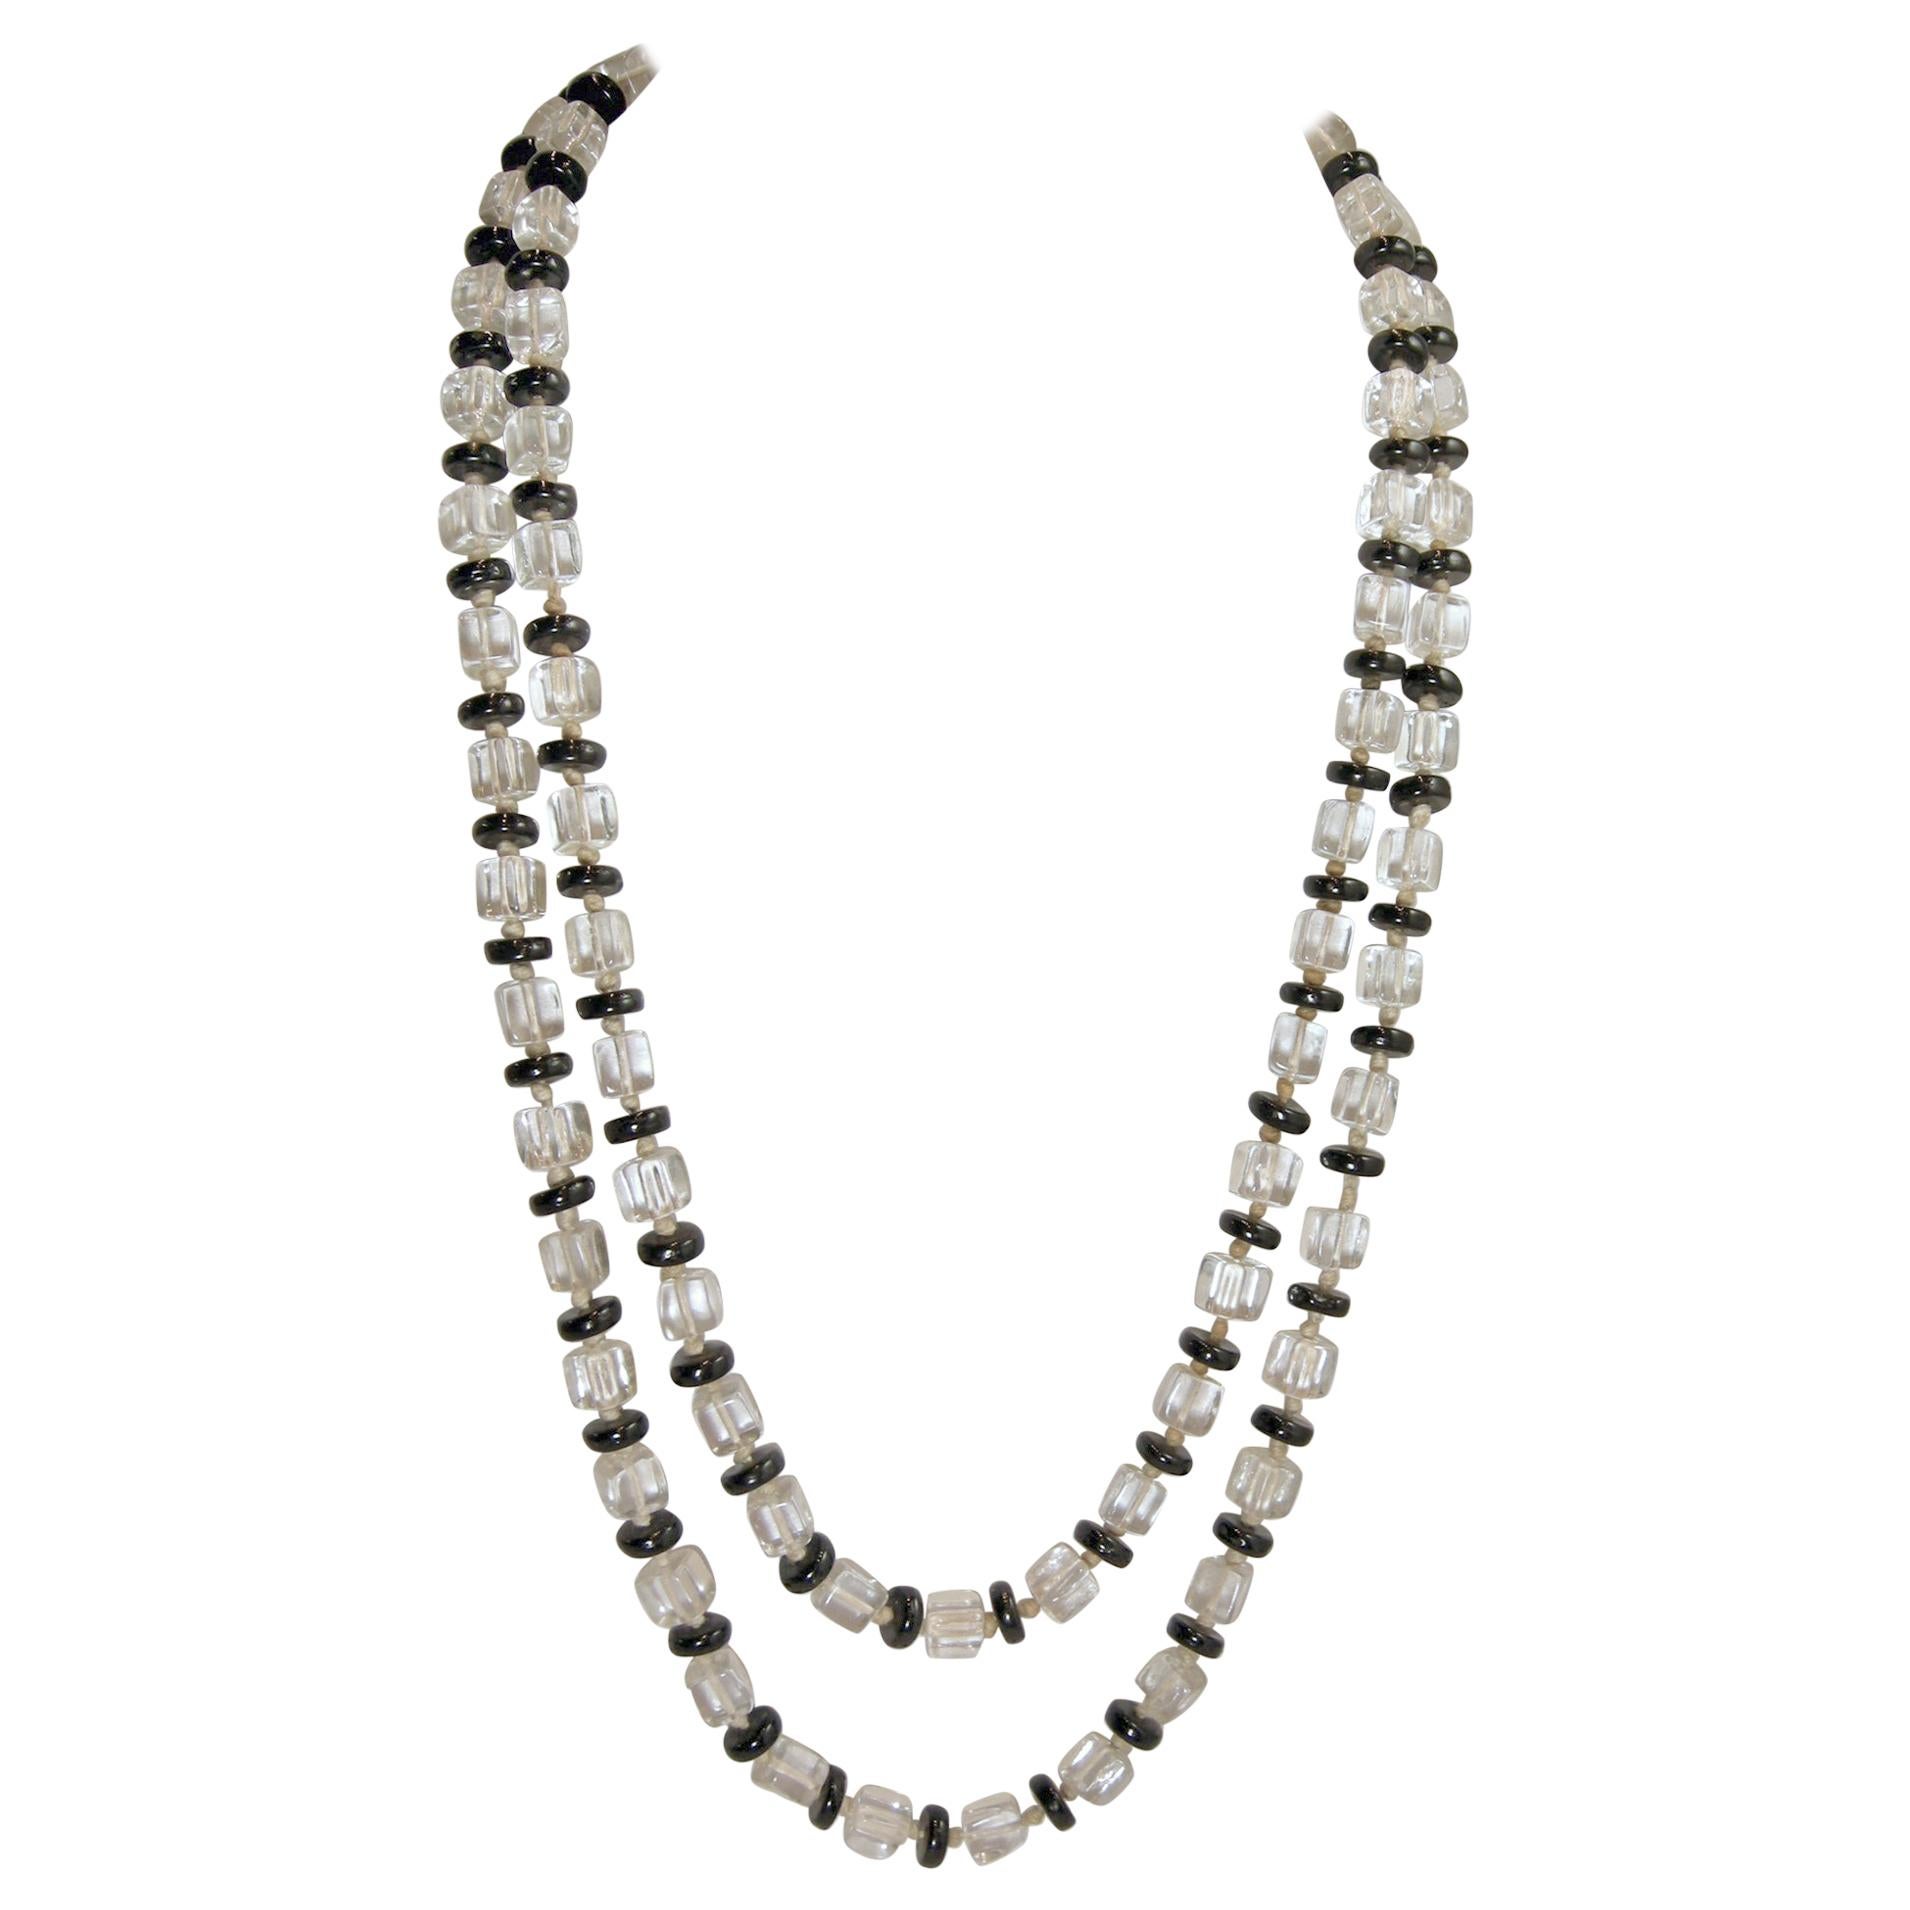 Vintage Art Deco 1920s Black & Clear Crystal Bead Rope Necklace For Sale